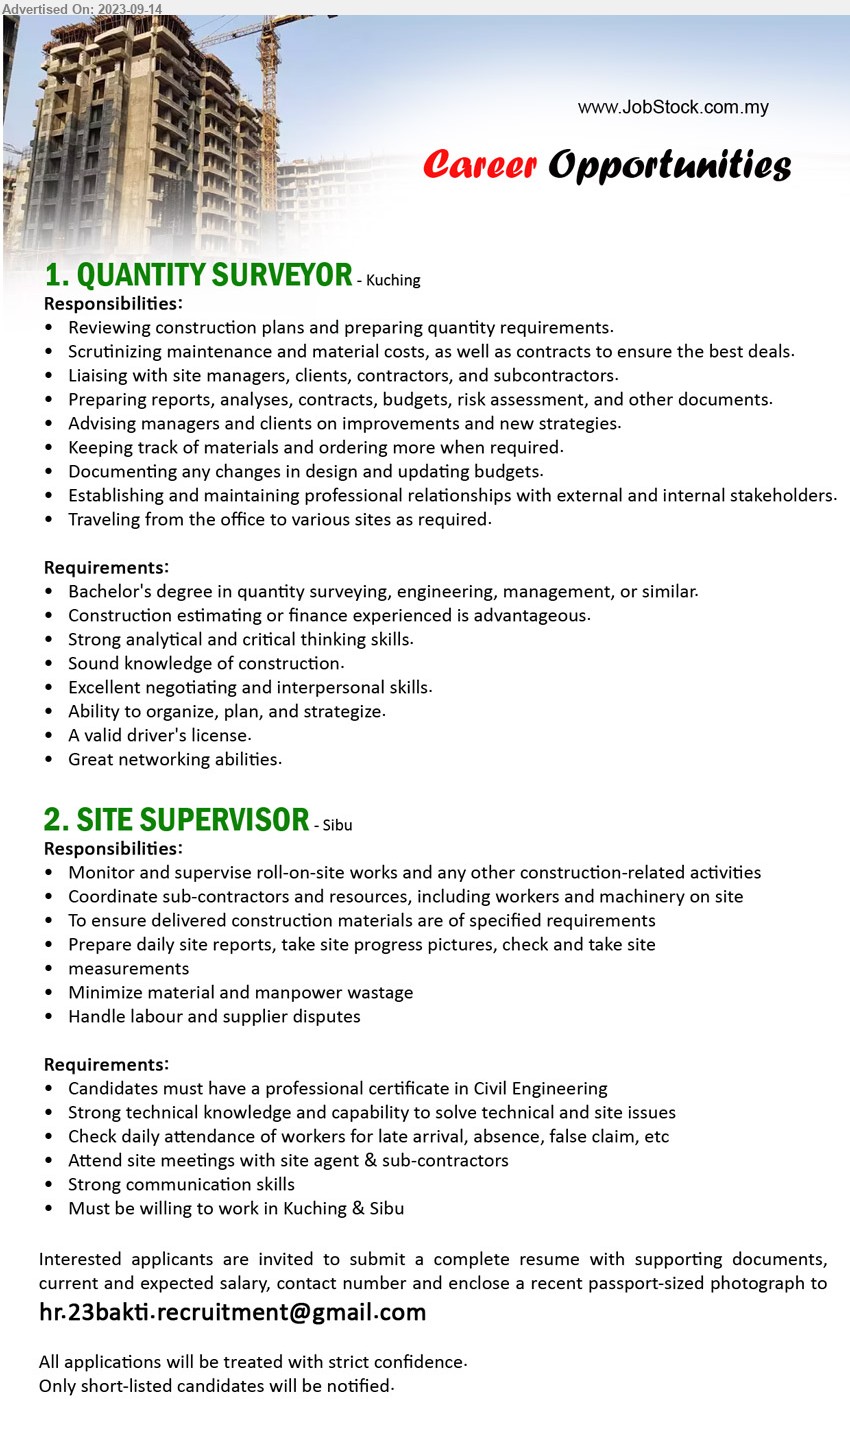 ADVERTISER - 1. QUANTITY SURVEYOR (Kuching), Bachelor's degree in quantity surveying, engineering, management, or similar, Strong analytical and critical thinking skills.,...
2. SITE SUPERVISOR (Sibu), Candidates must have a professional certificate in Civil Engineering,...
Email resume to ...